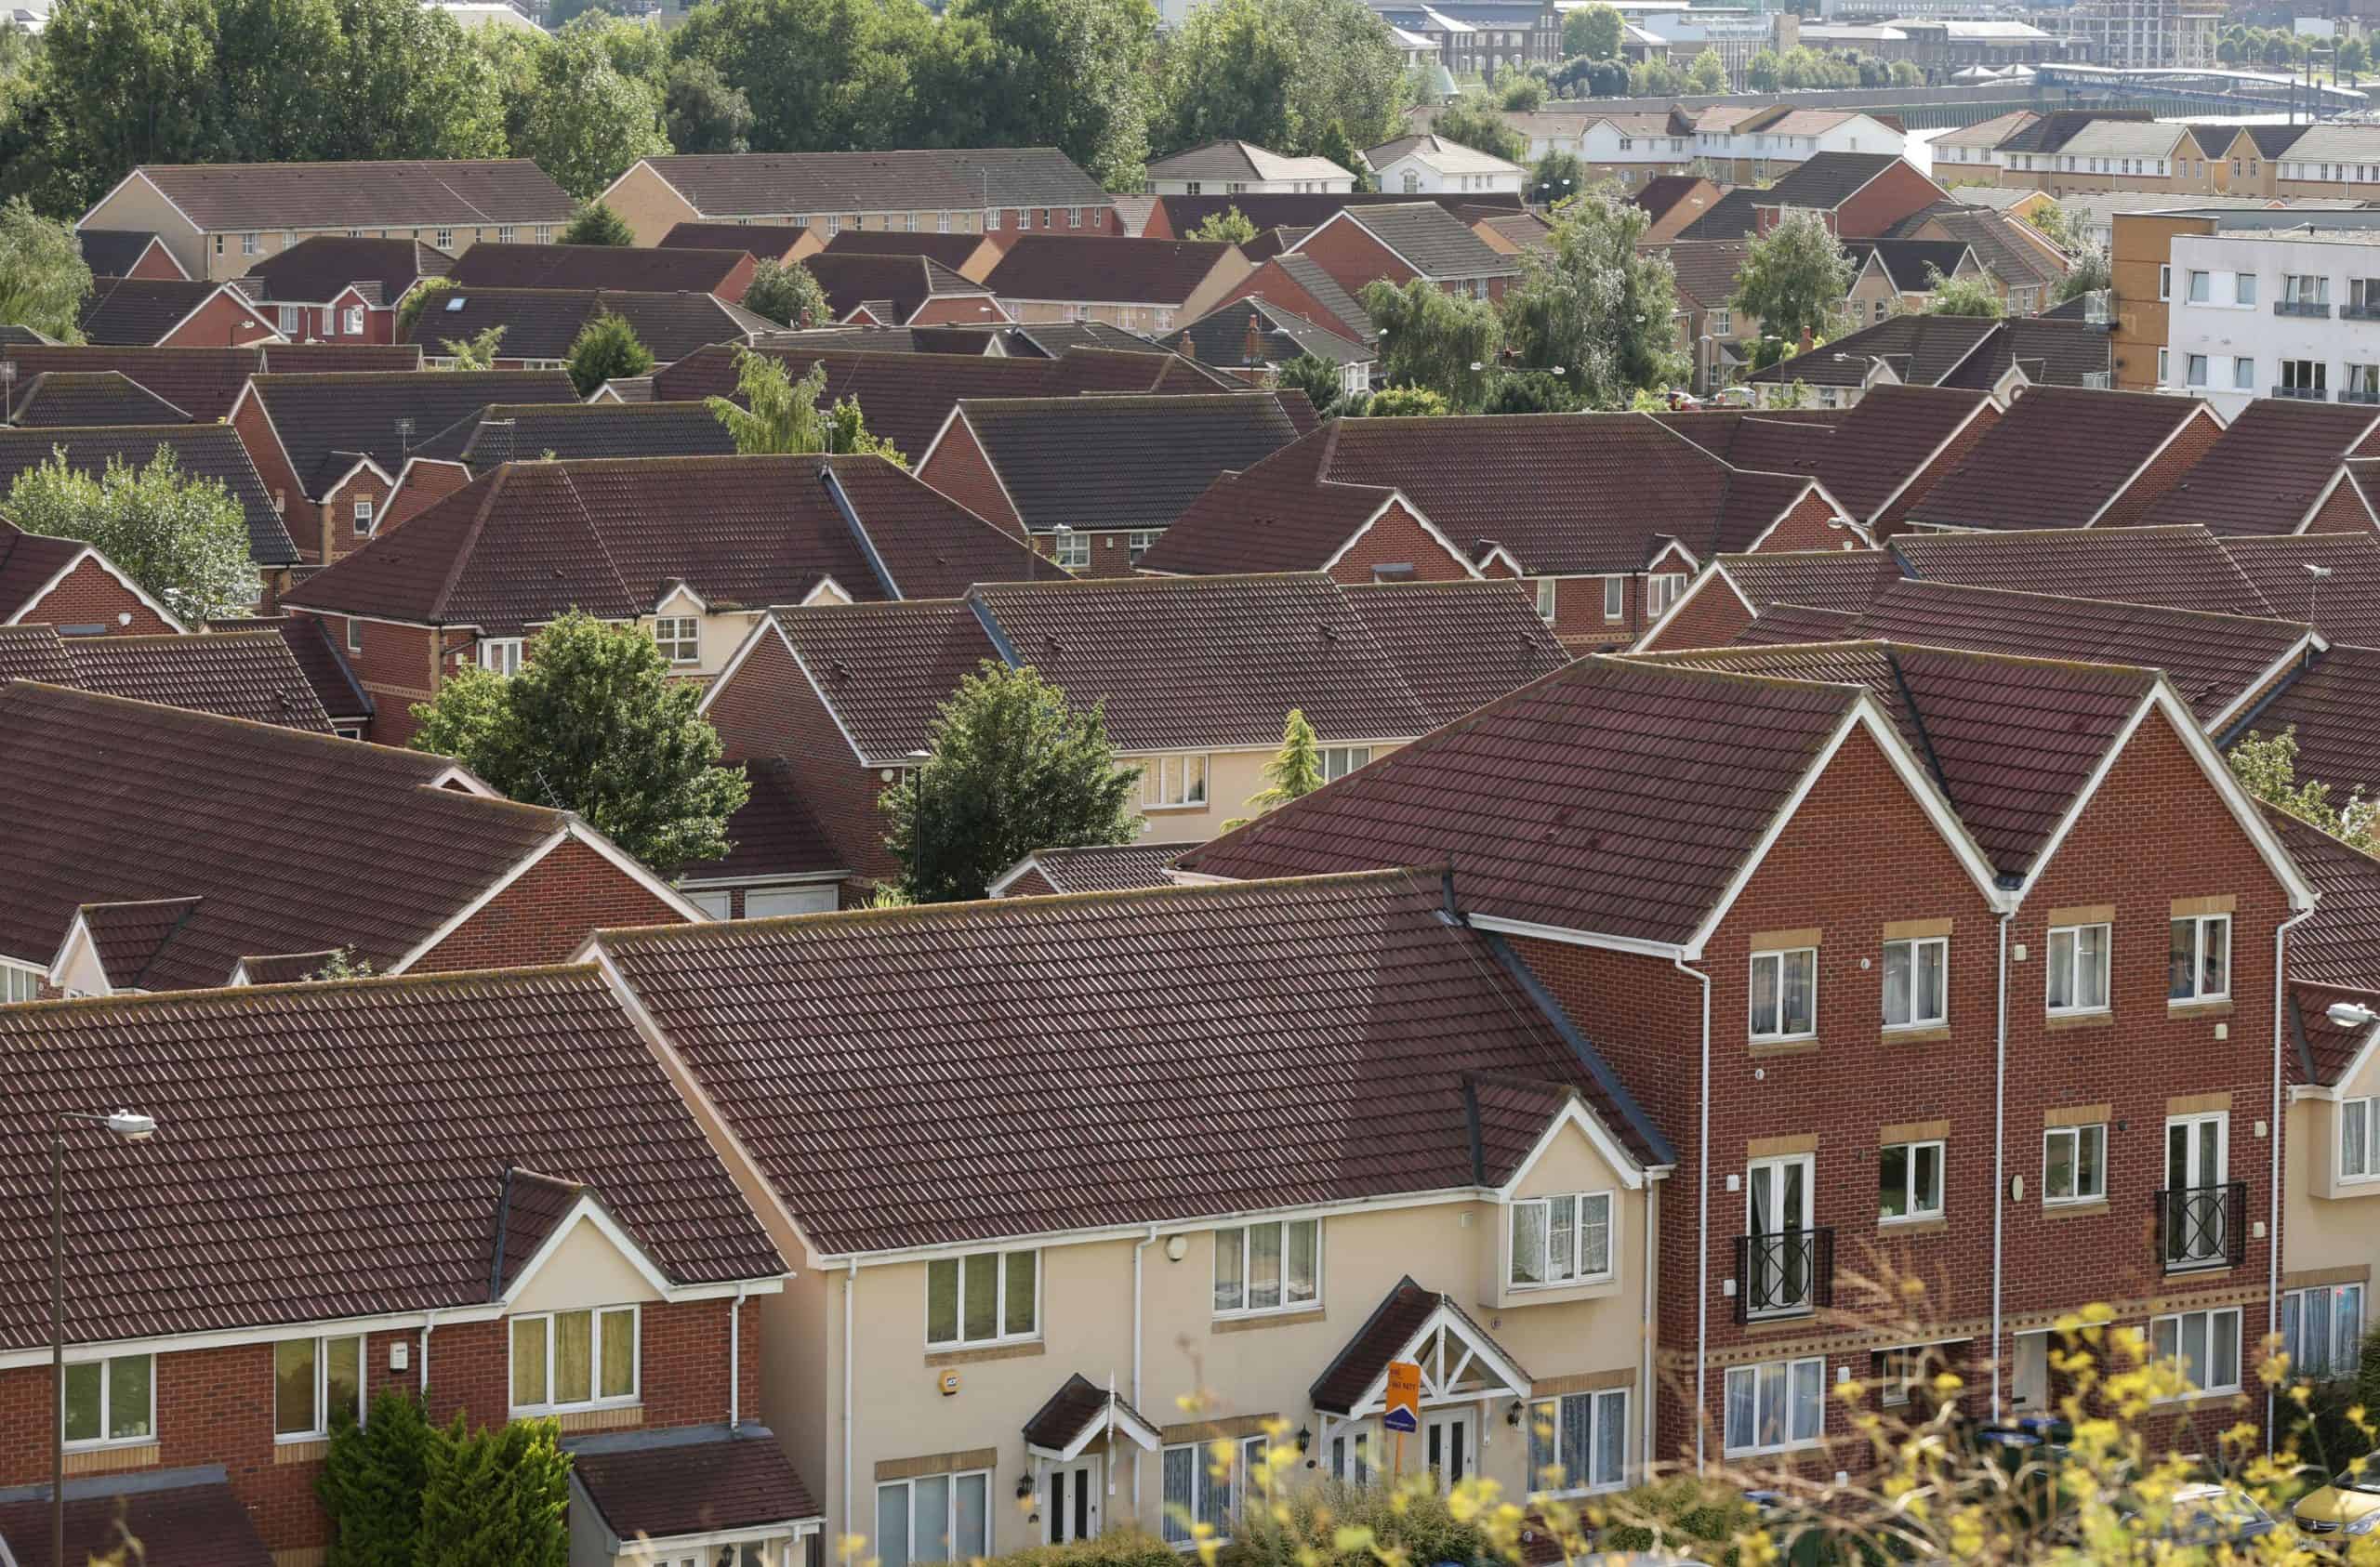 Private rents in UK rise at fastest rate on record